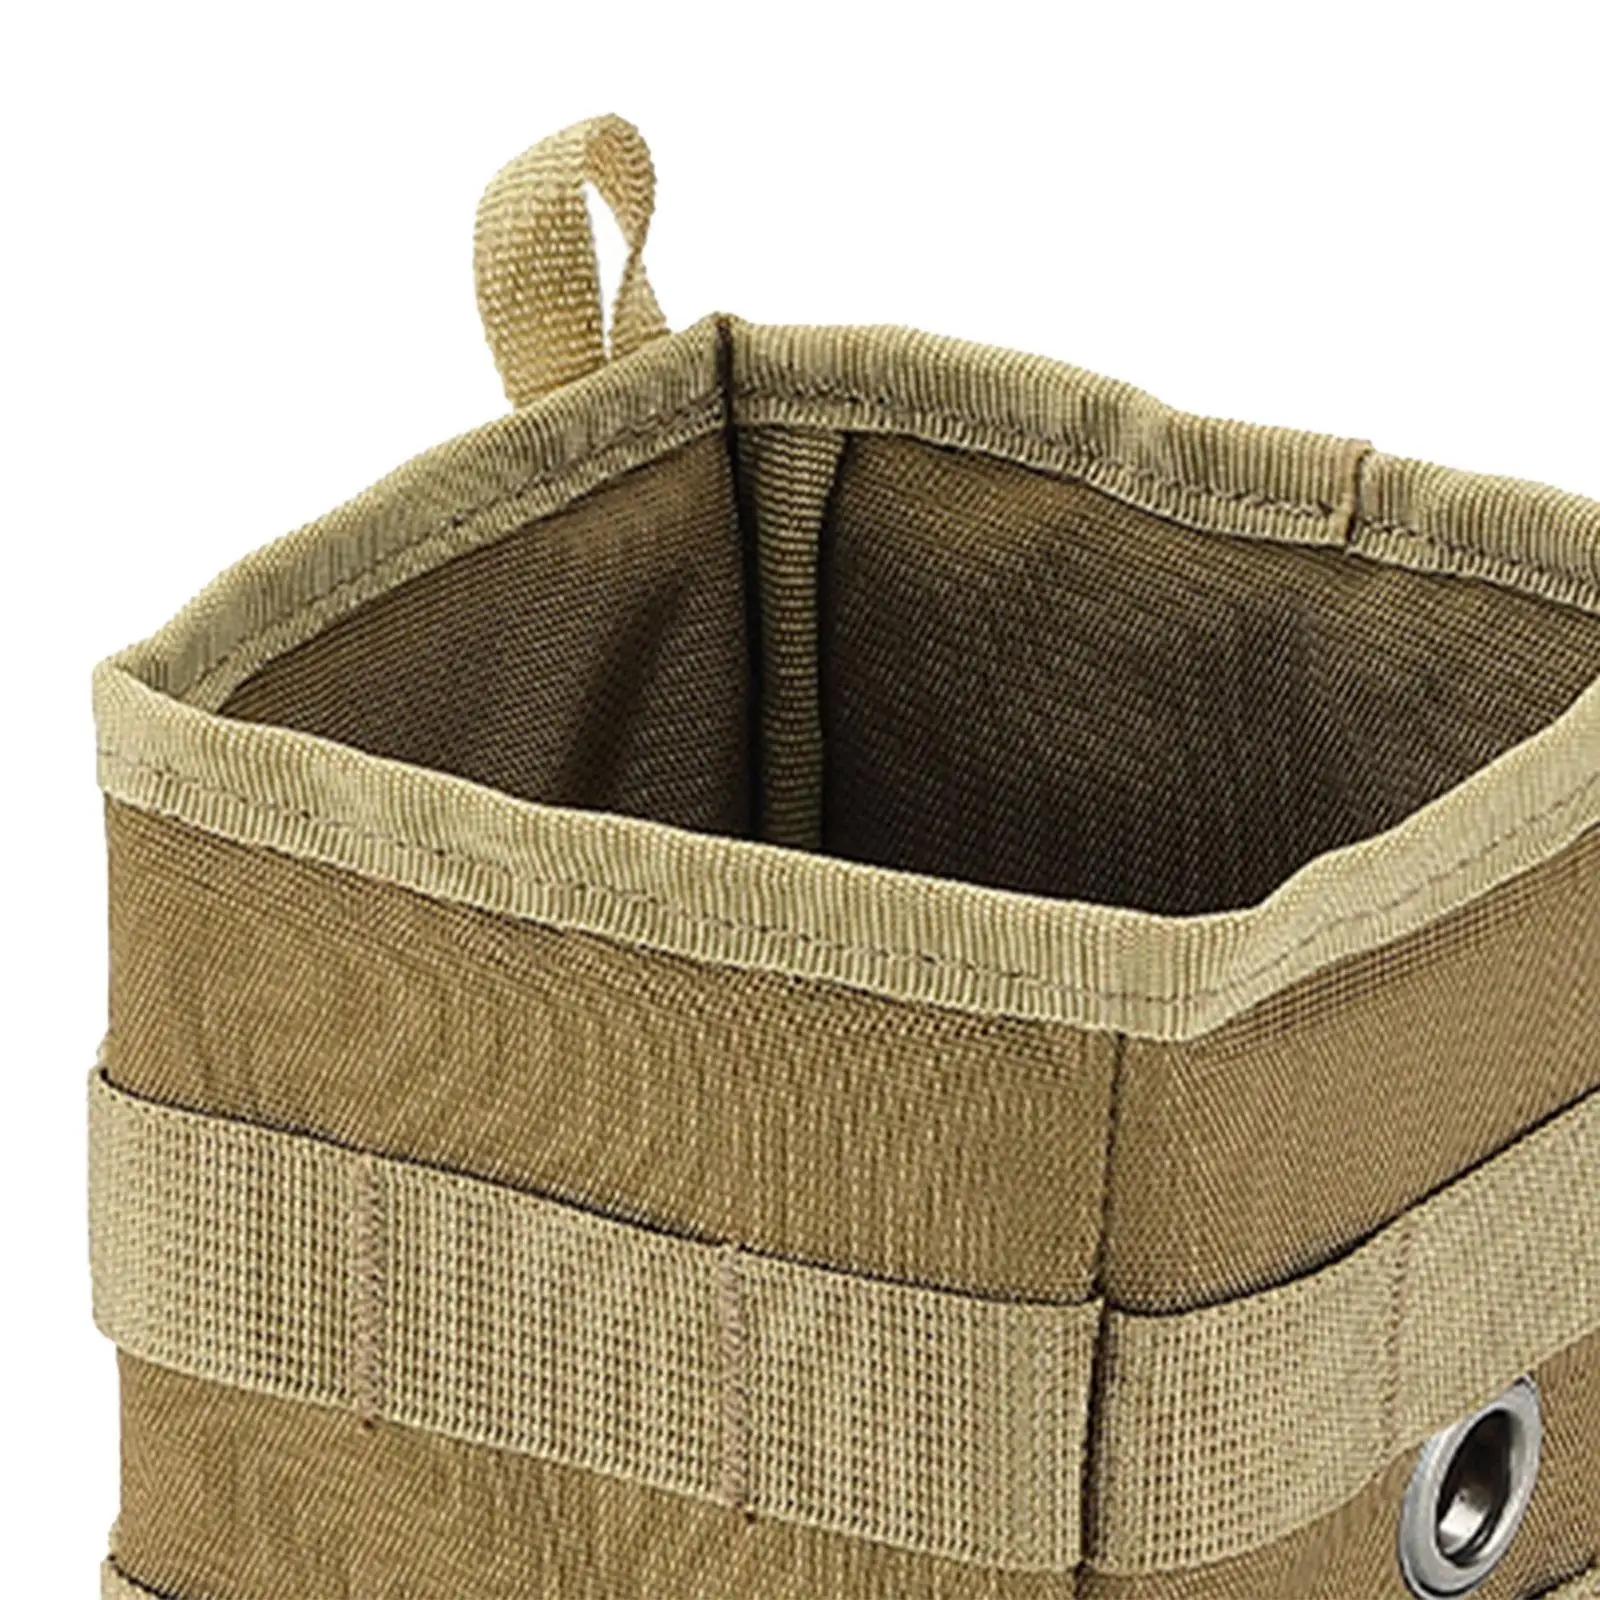 Bags Desk Side Pouch Side Bag Hanging Hanging Storage Baskets for BBQ Chair